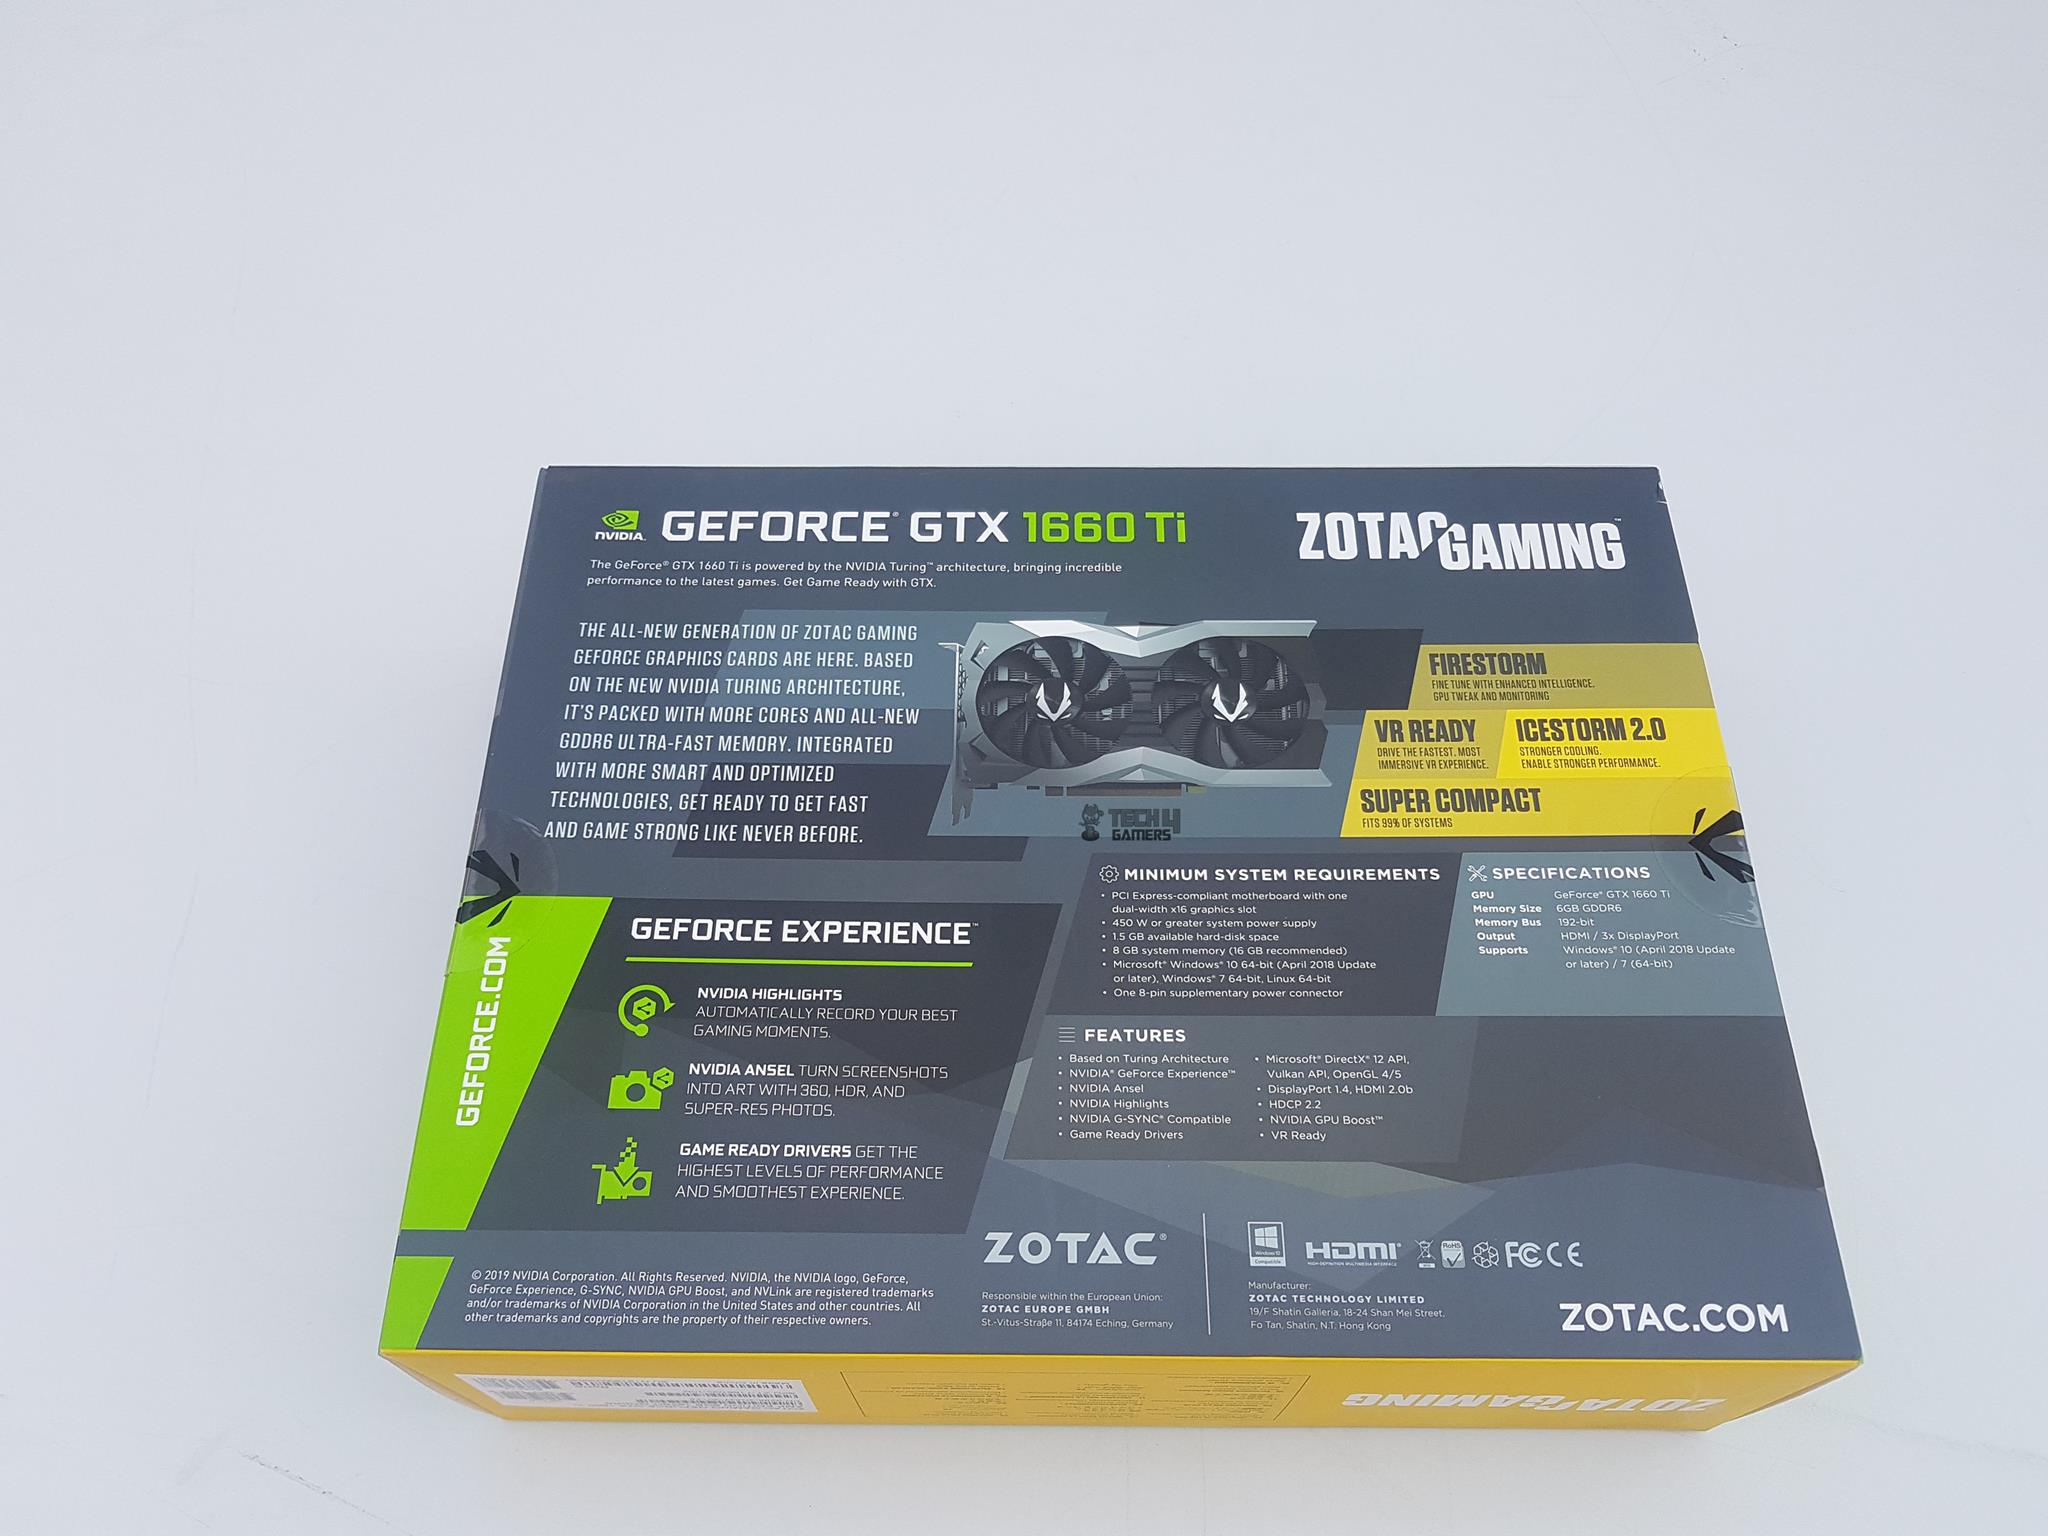 ZOTAC GeForce GTX 1660 Ti Amp Edition — The backside of the box